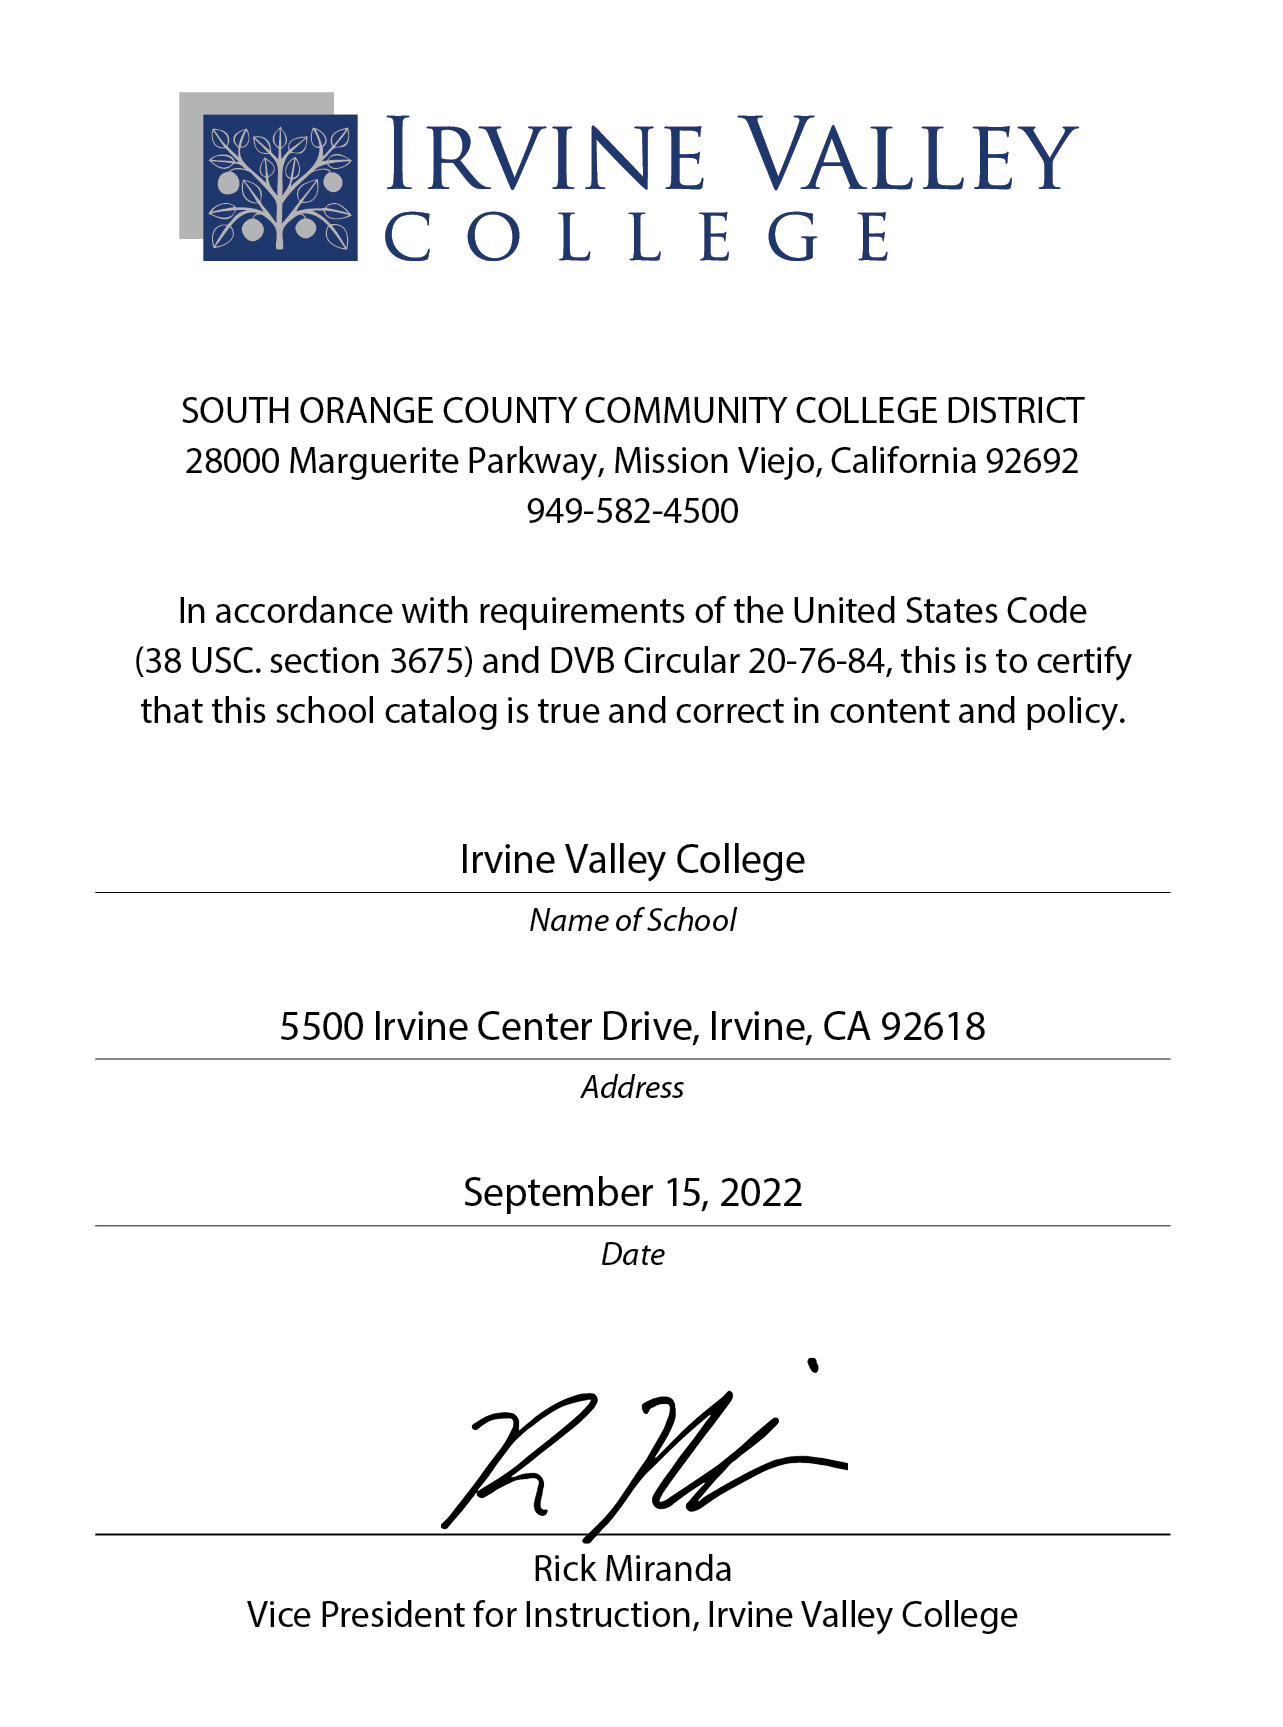 IVC Catalog Certification graphic. The image lists the IVC logo, the address of the South Orange County Community College District, and a statement that in accordance with requirements of the United States Code (38 USC. section 1775) and DVC Circular 20-76-84, this is to certify that this school catalog is true and correct in content and policy. It is signed by IVC Vice President for Instruction Rick Miranda, and is dated Septem ber 15, 2022.